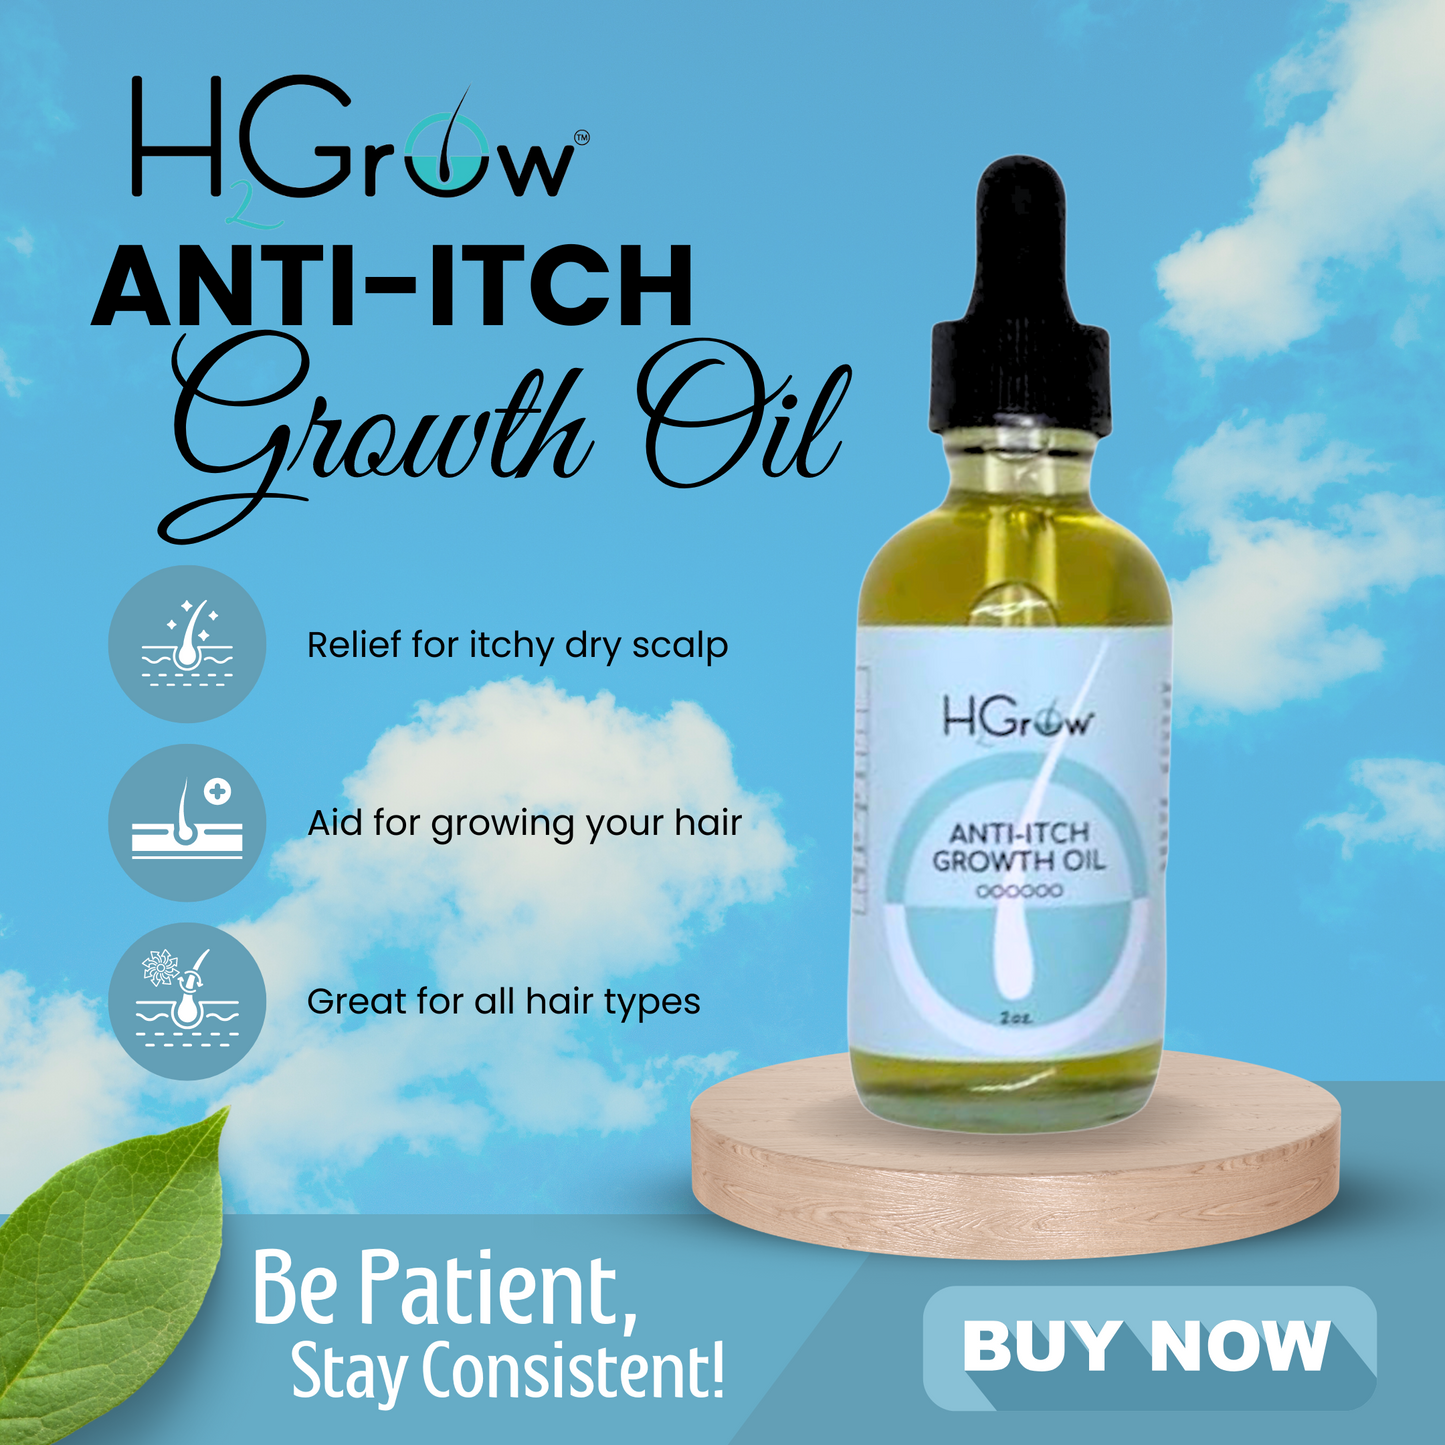 Anti-itch Growth Oil